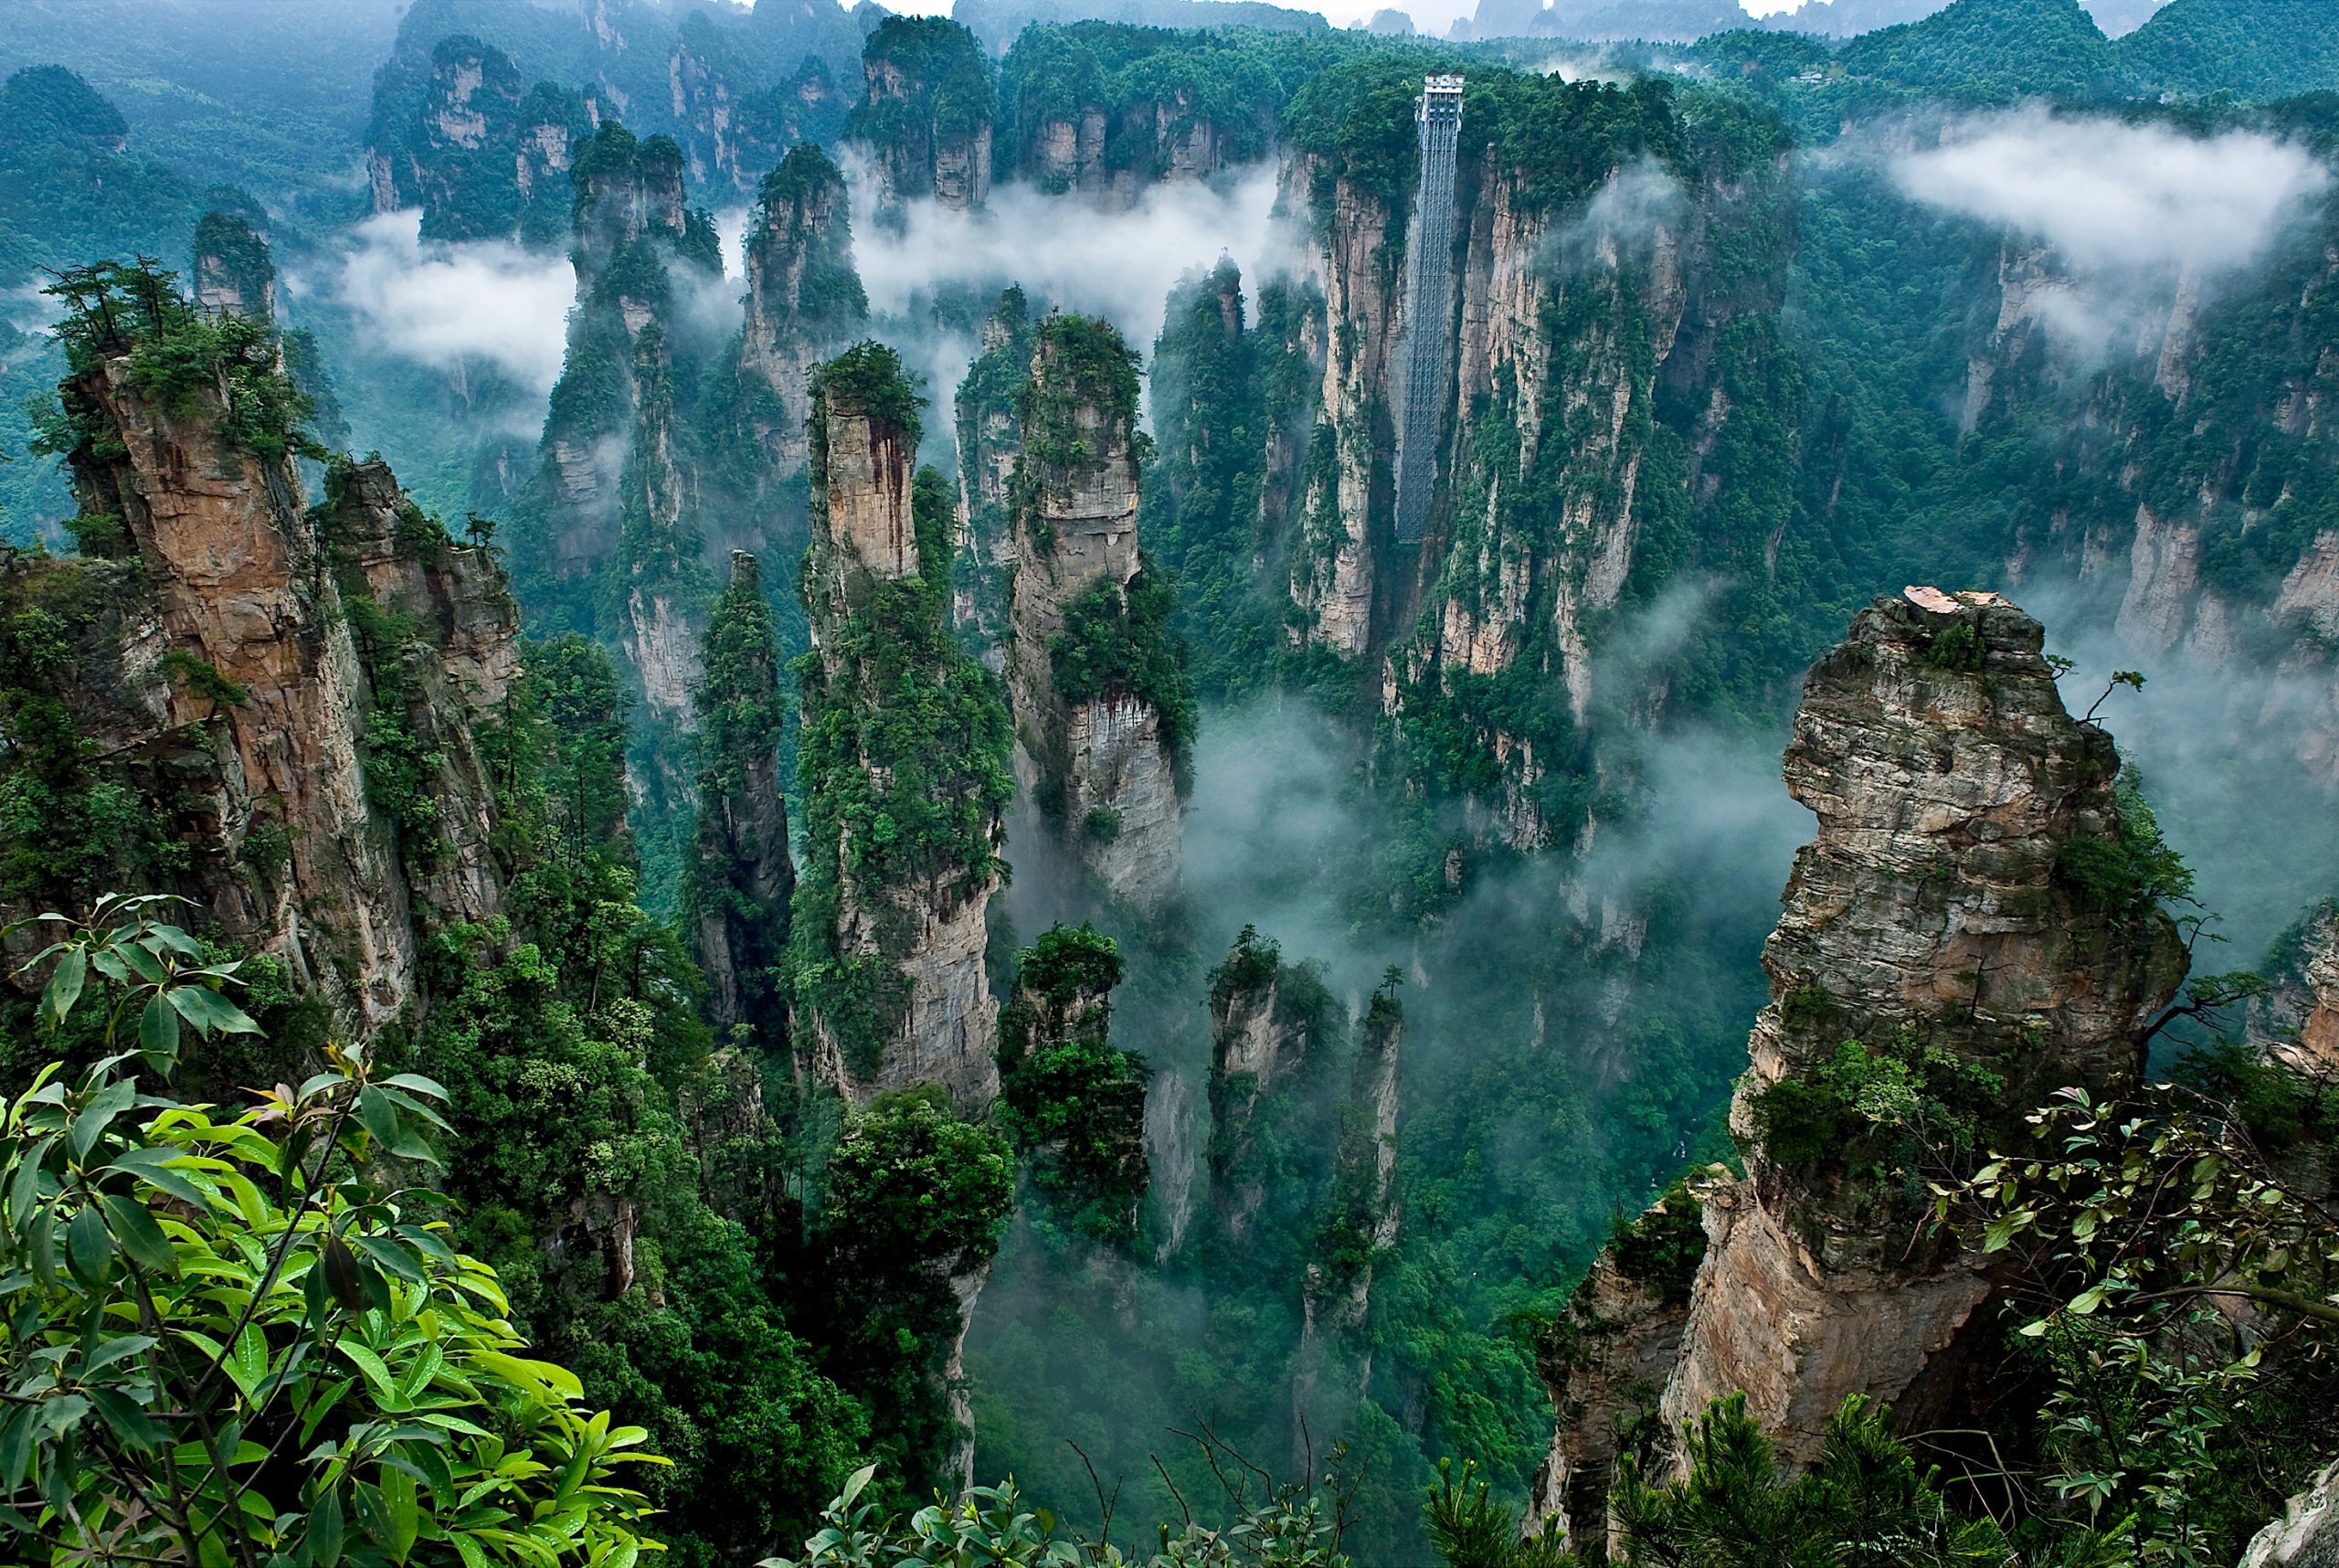 5-Day Highlights Tour of Zhangjiajie and Fenghuang